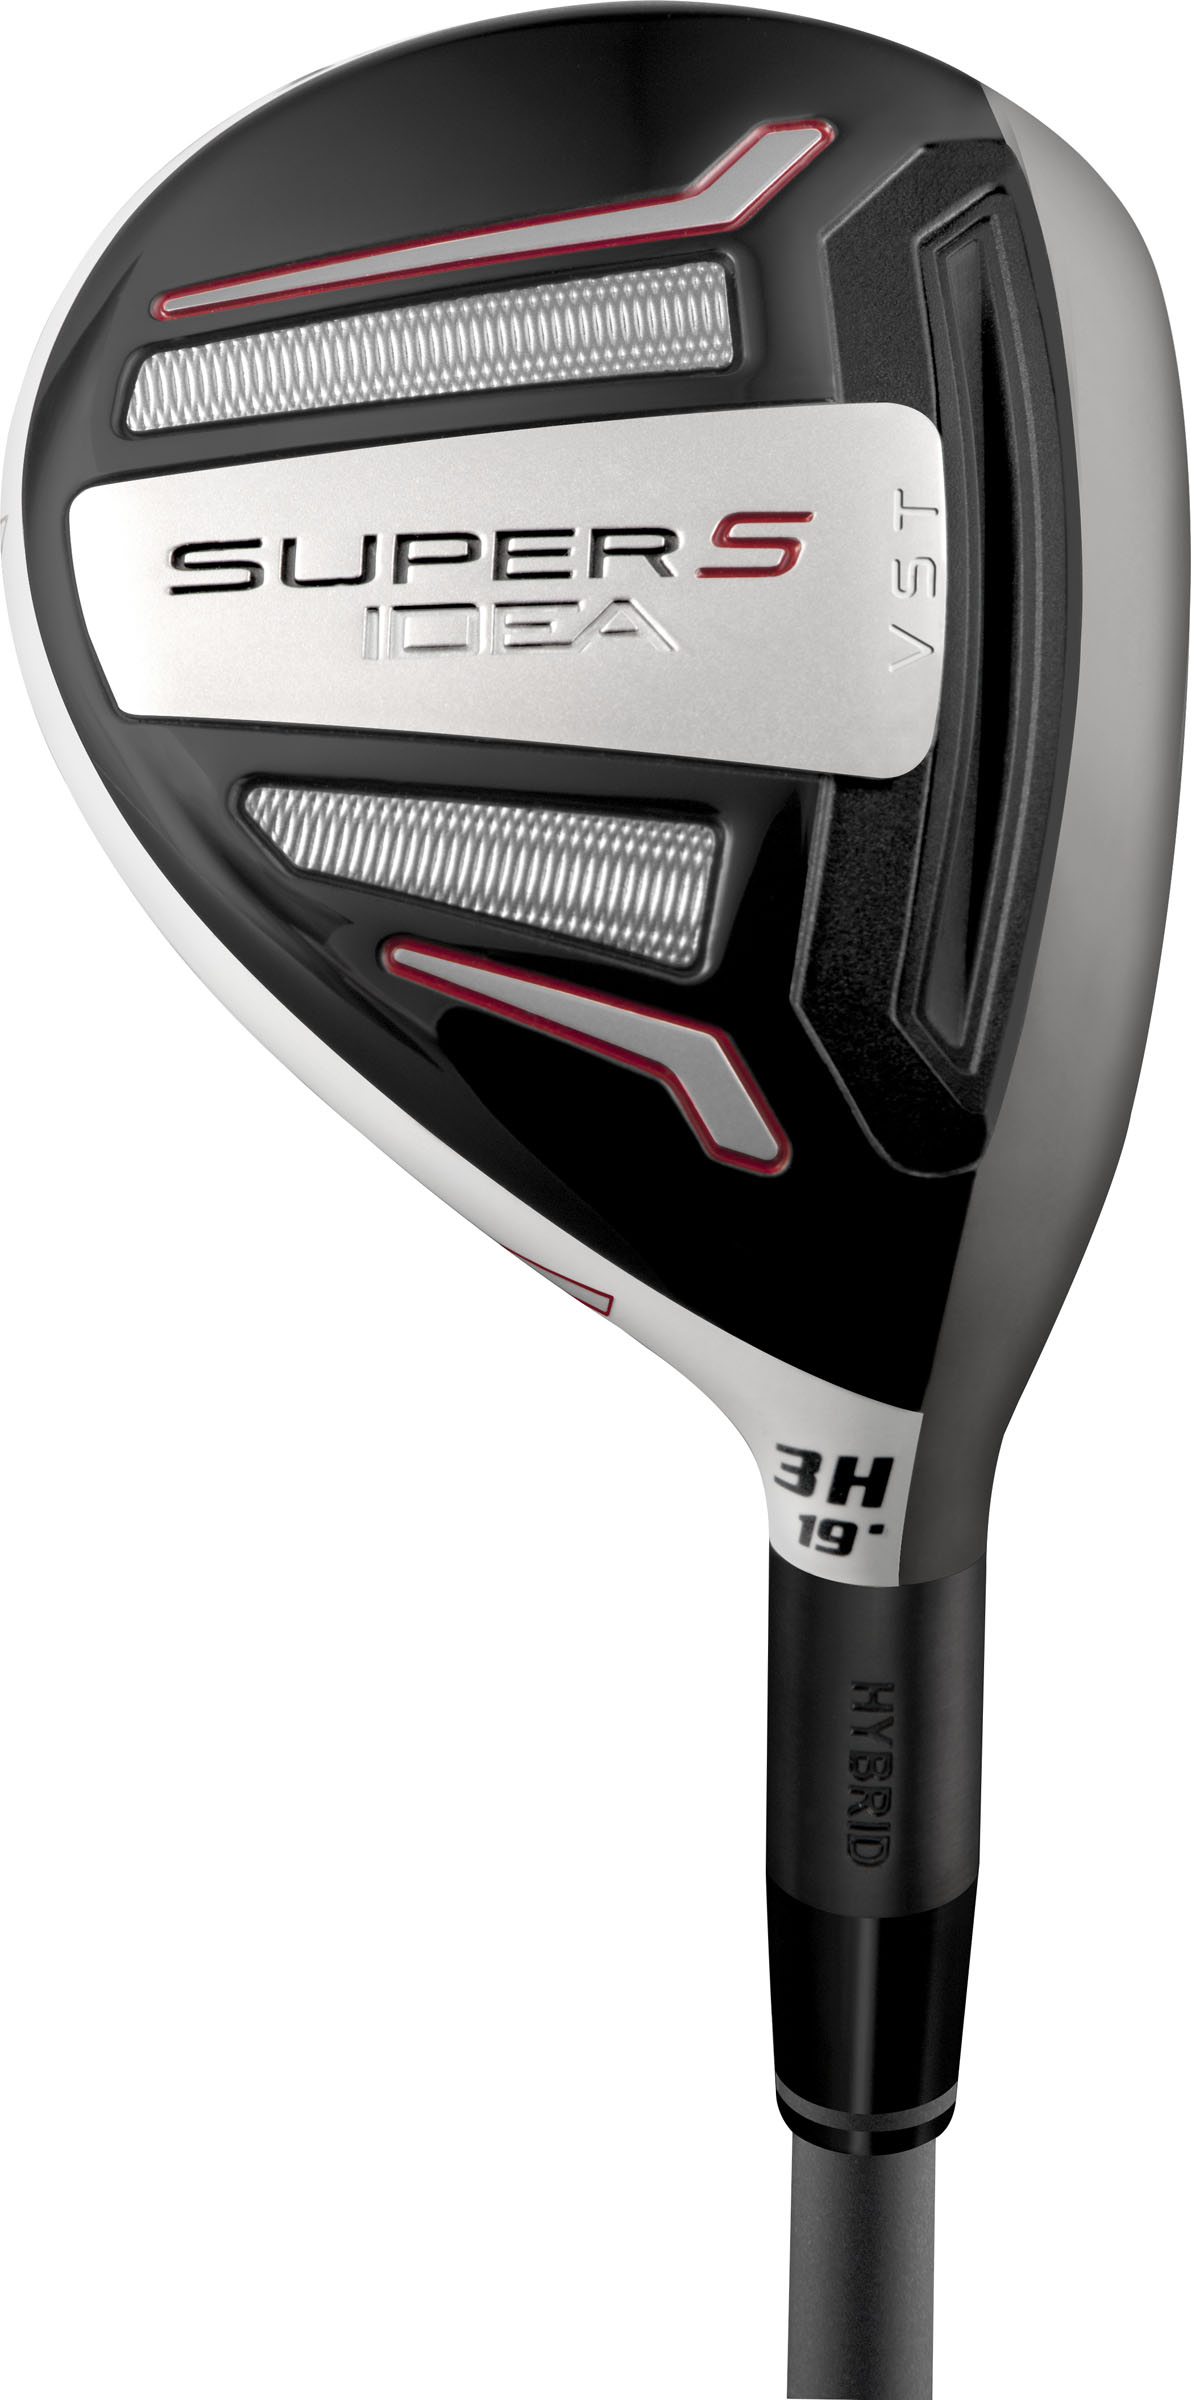 One of the first new drivers I used in my rebirth as a golfer was an Adams ...